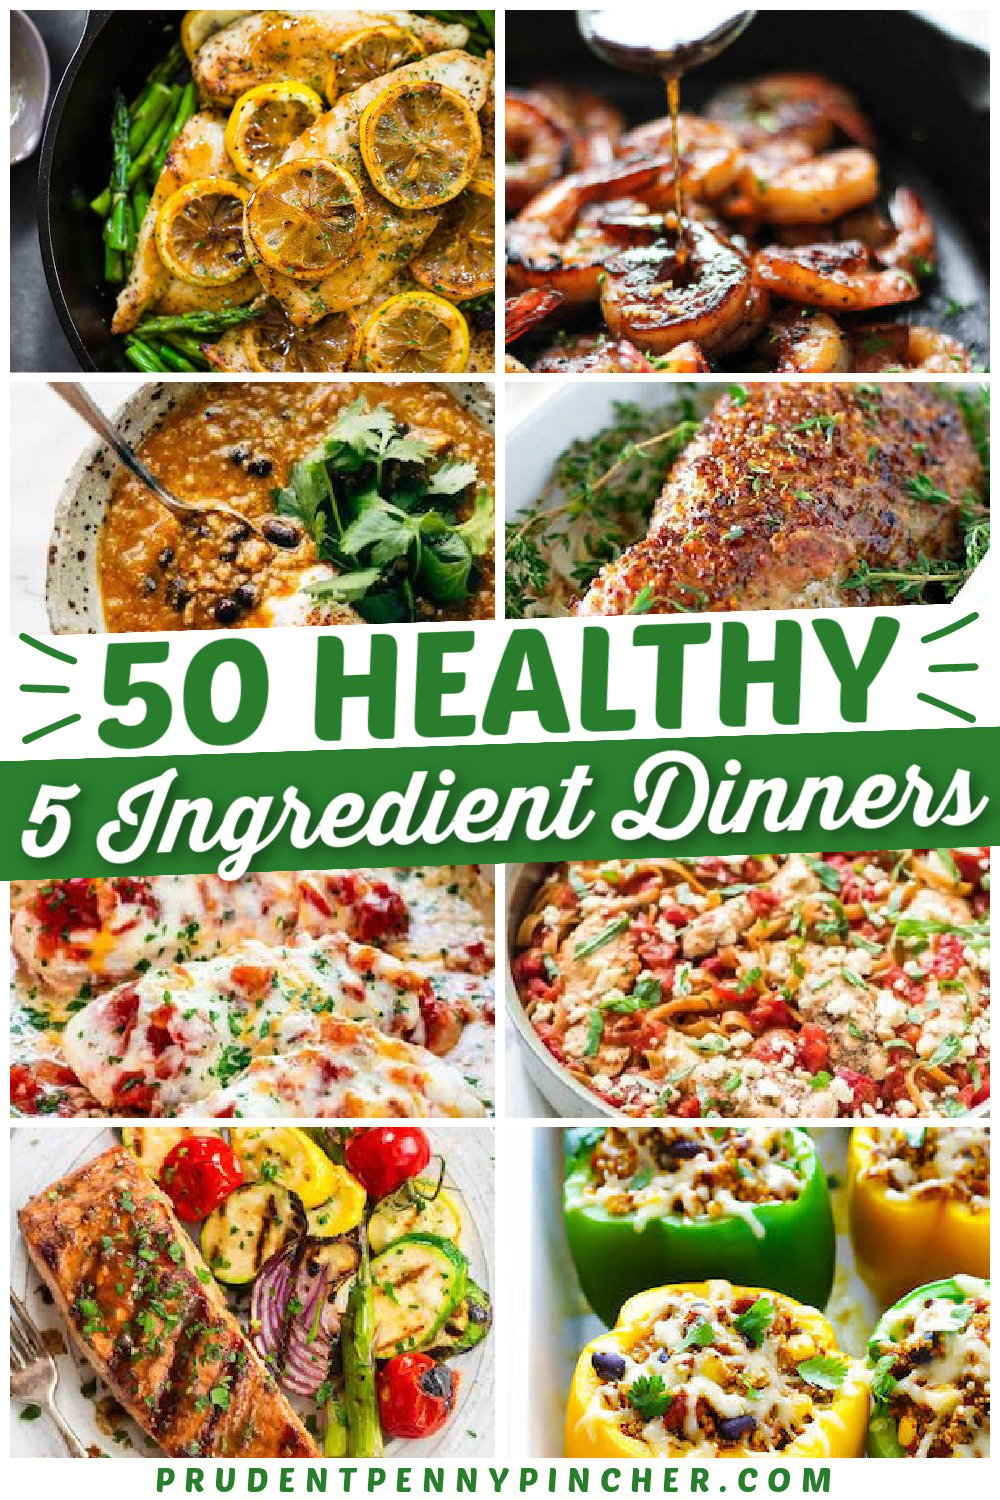 50 Best 5 Ingredient Healthy Dinner Recipes - Prudent Penny Pincher